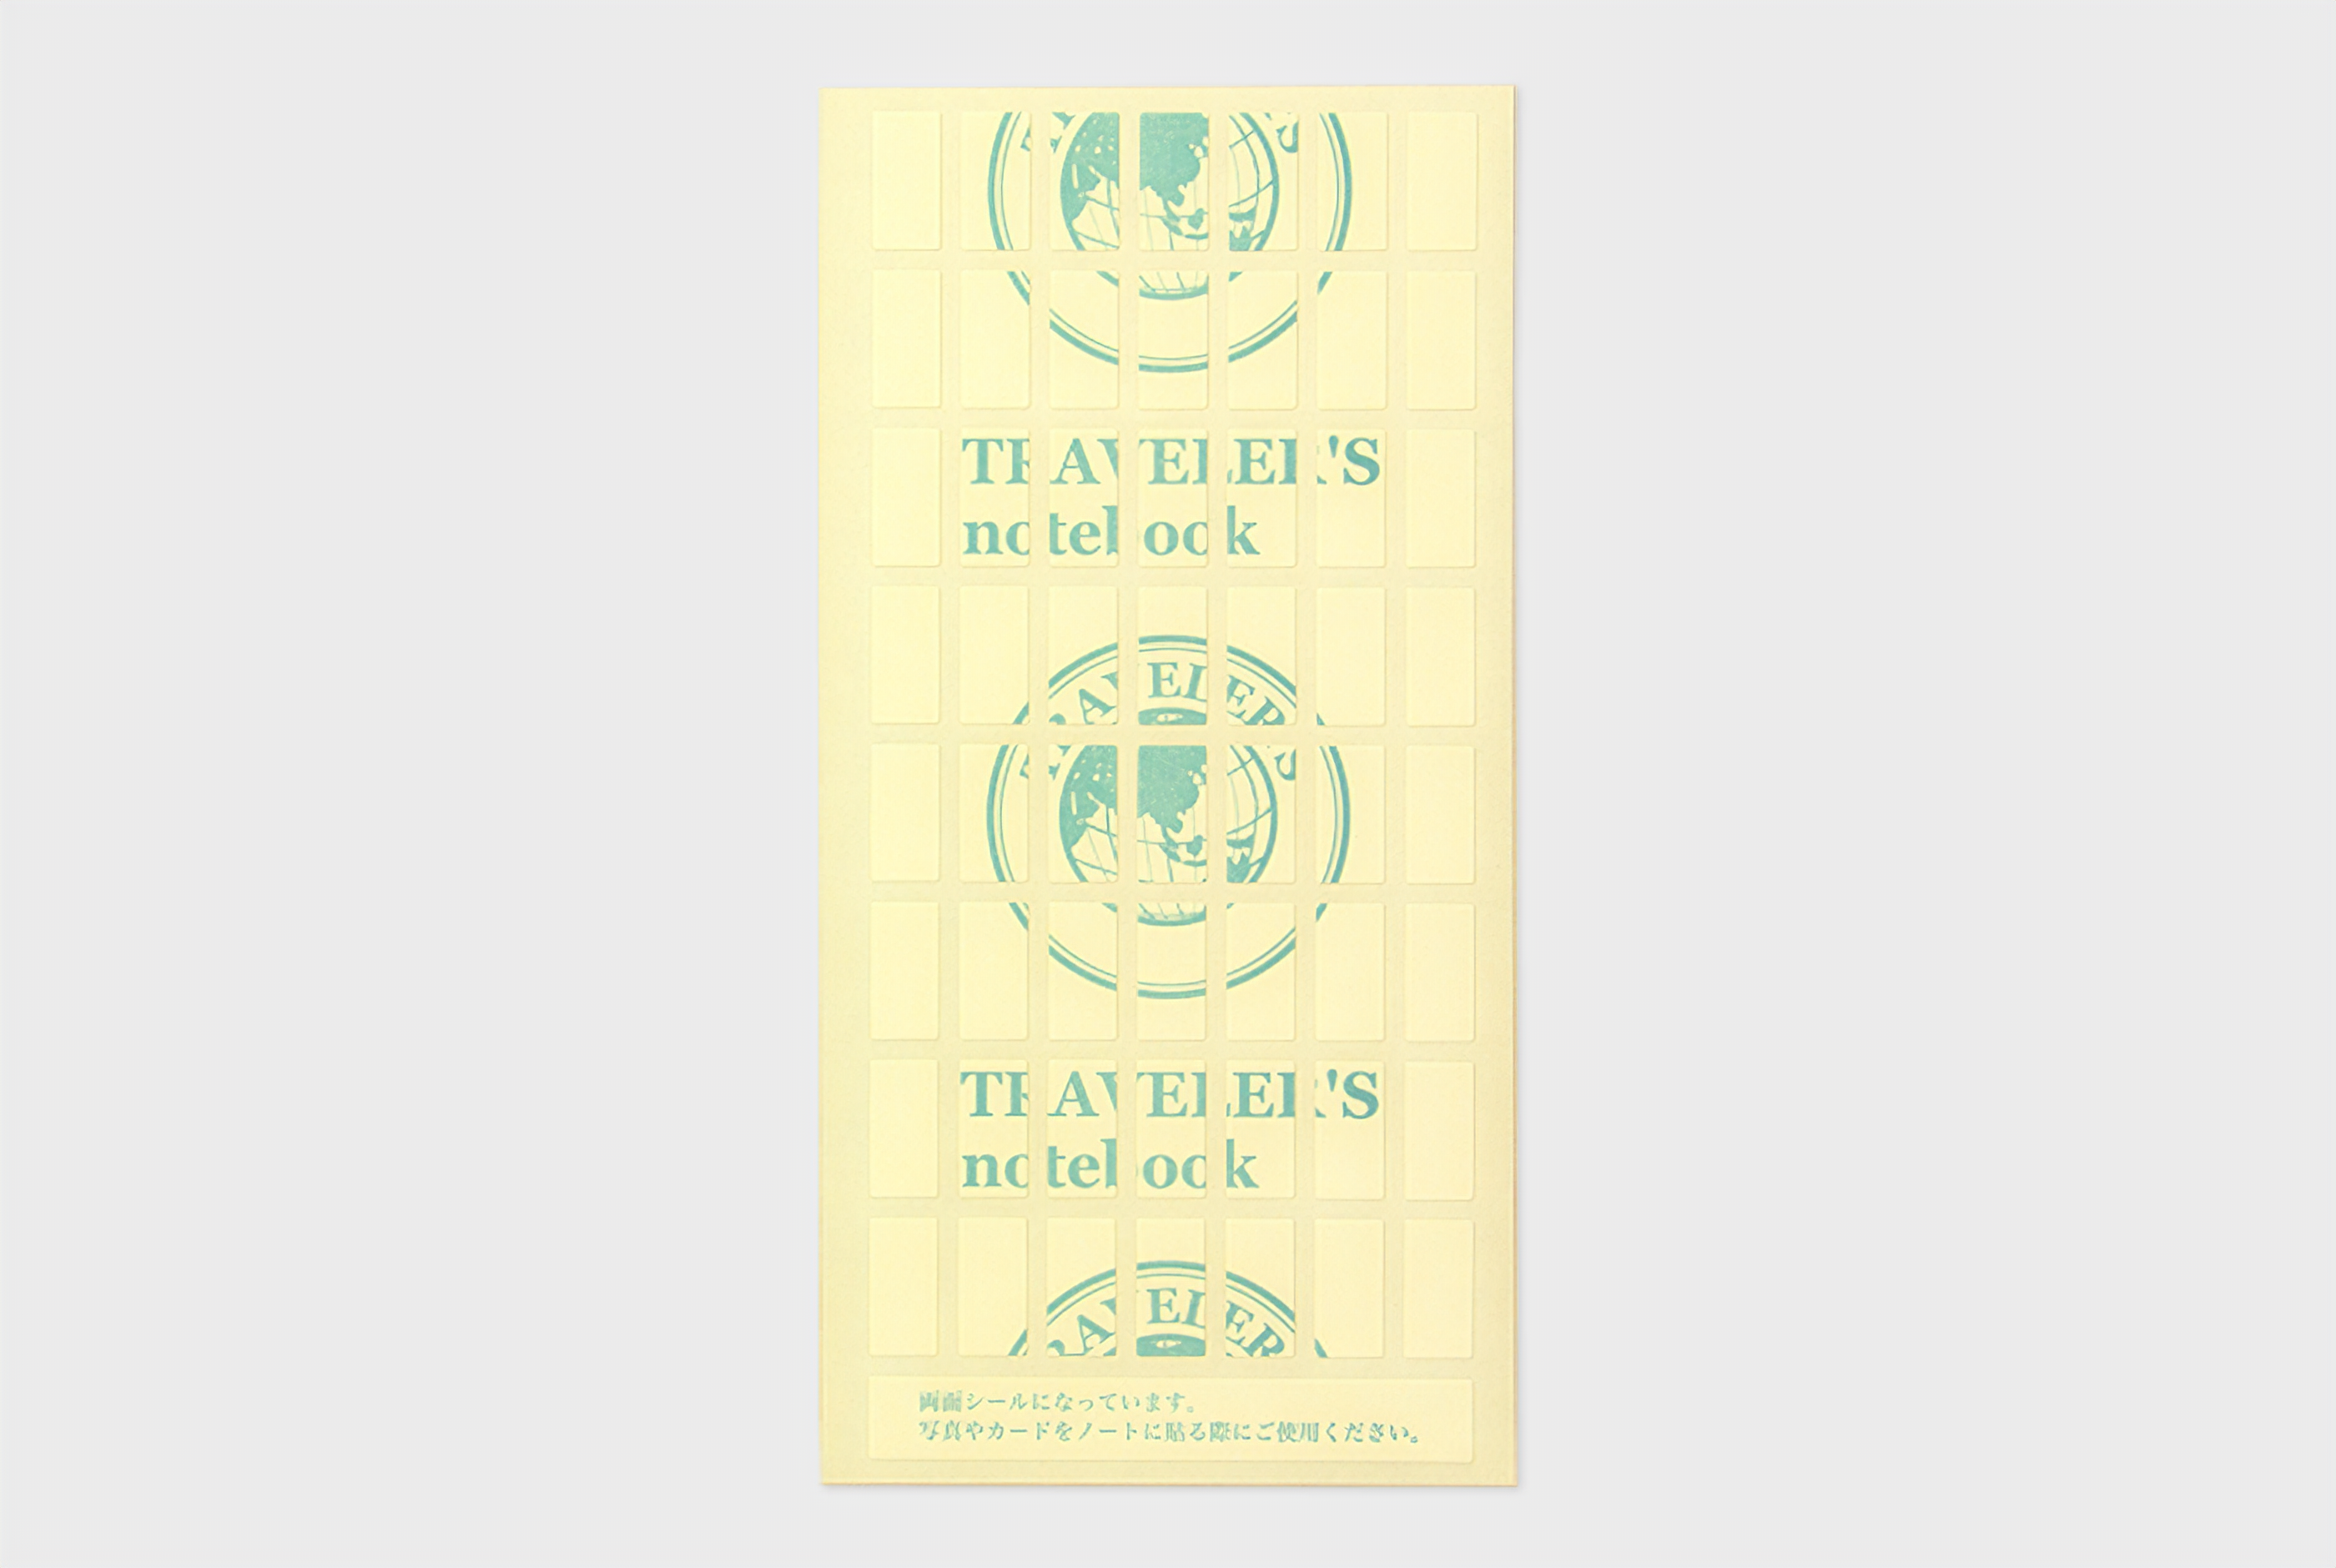 TRAVELER'S notebook - 010. Double Sided Tape Refill